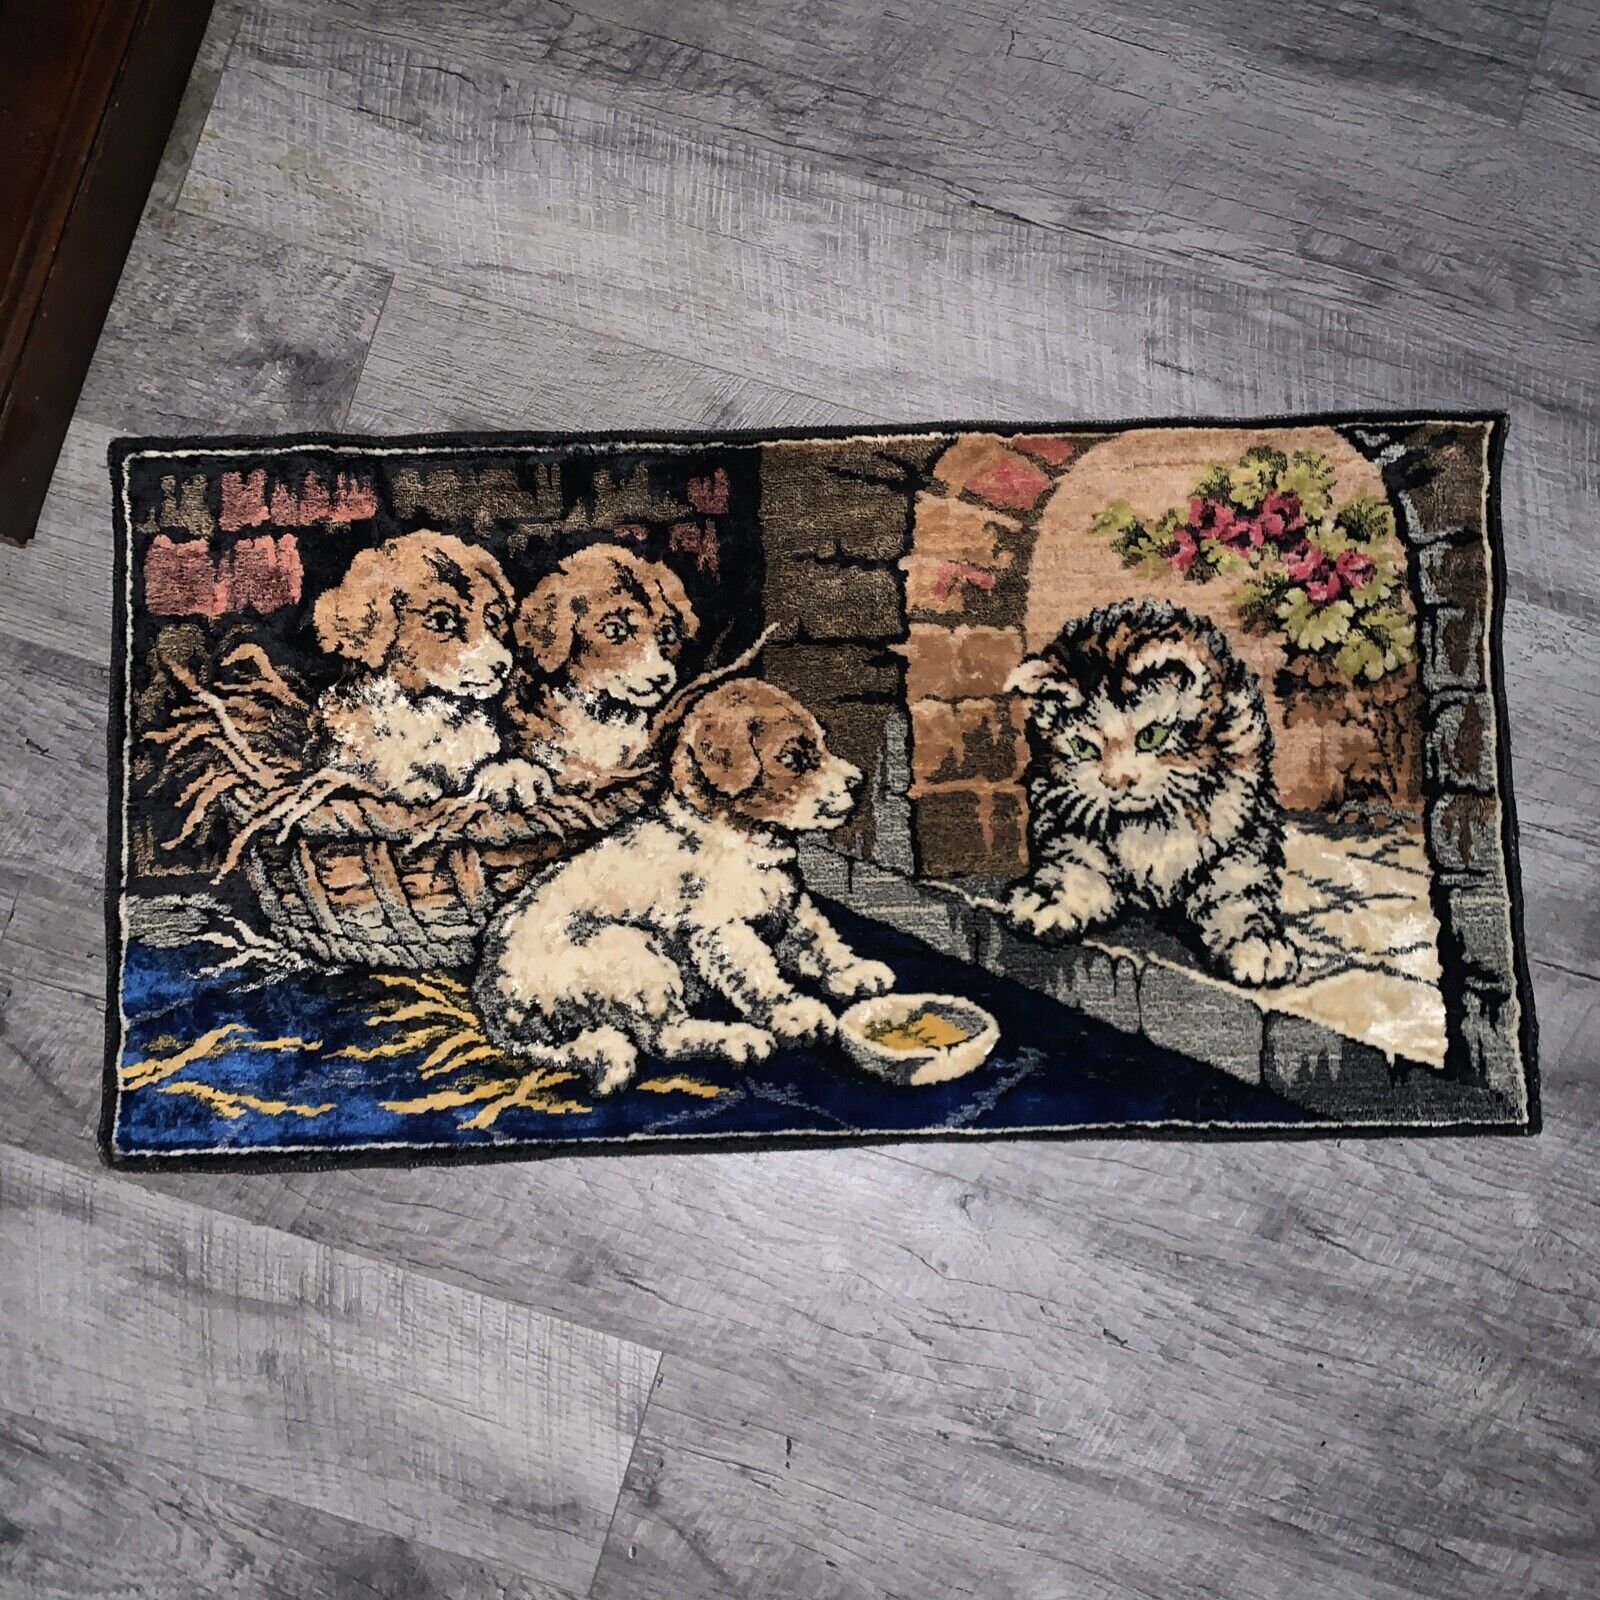 Vintage Wall Hanging Tapestry Rug Puppy Kitten Cat Dogs 37”x19”